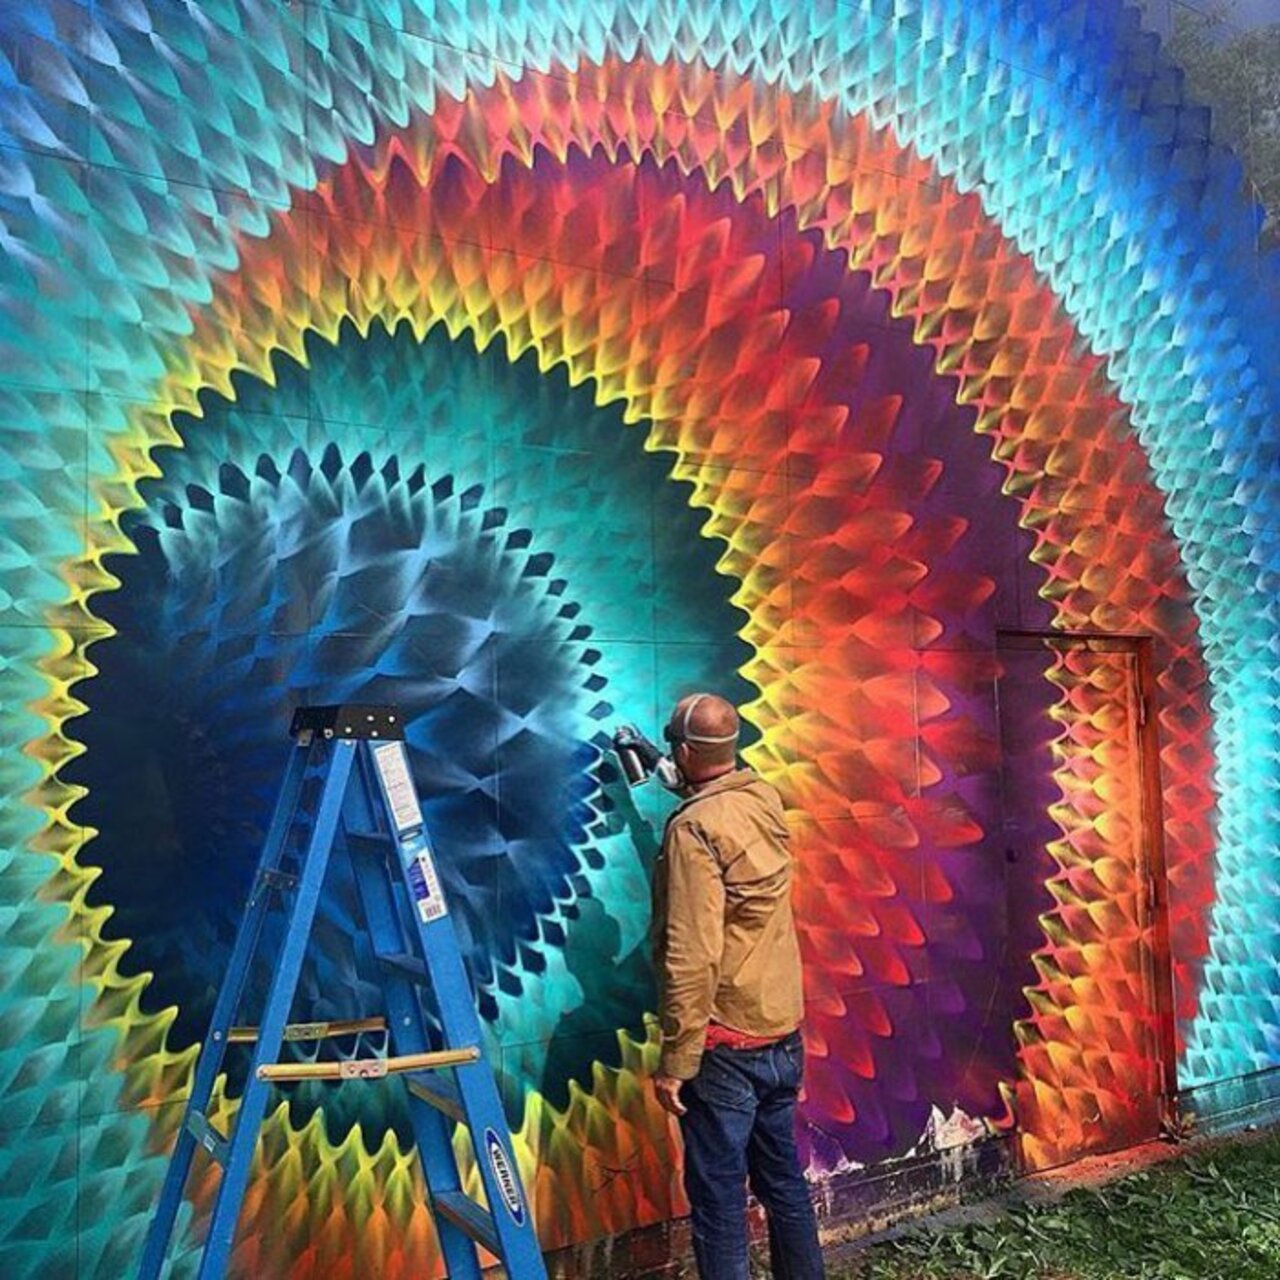 #StreetArt Rainbow – Creative Colours | Be ▲rtist - Be ▲rt https://beartistbeart.com/2016/06/23/streetart-rainbow-creative-colours/?utm_campaign=crowdfire&utm_content=crowdfire&utm_medium=social&utm_source=twitter https://t.co/T6MNCTZkB4